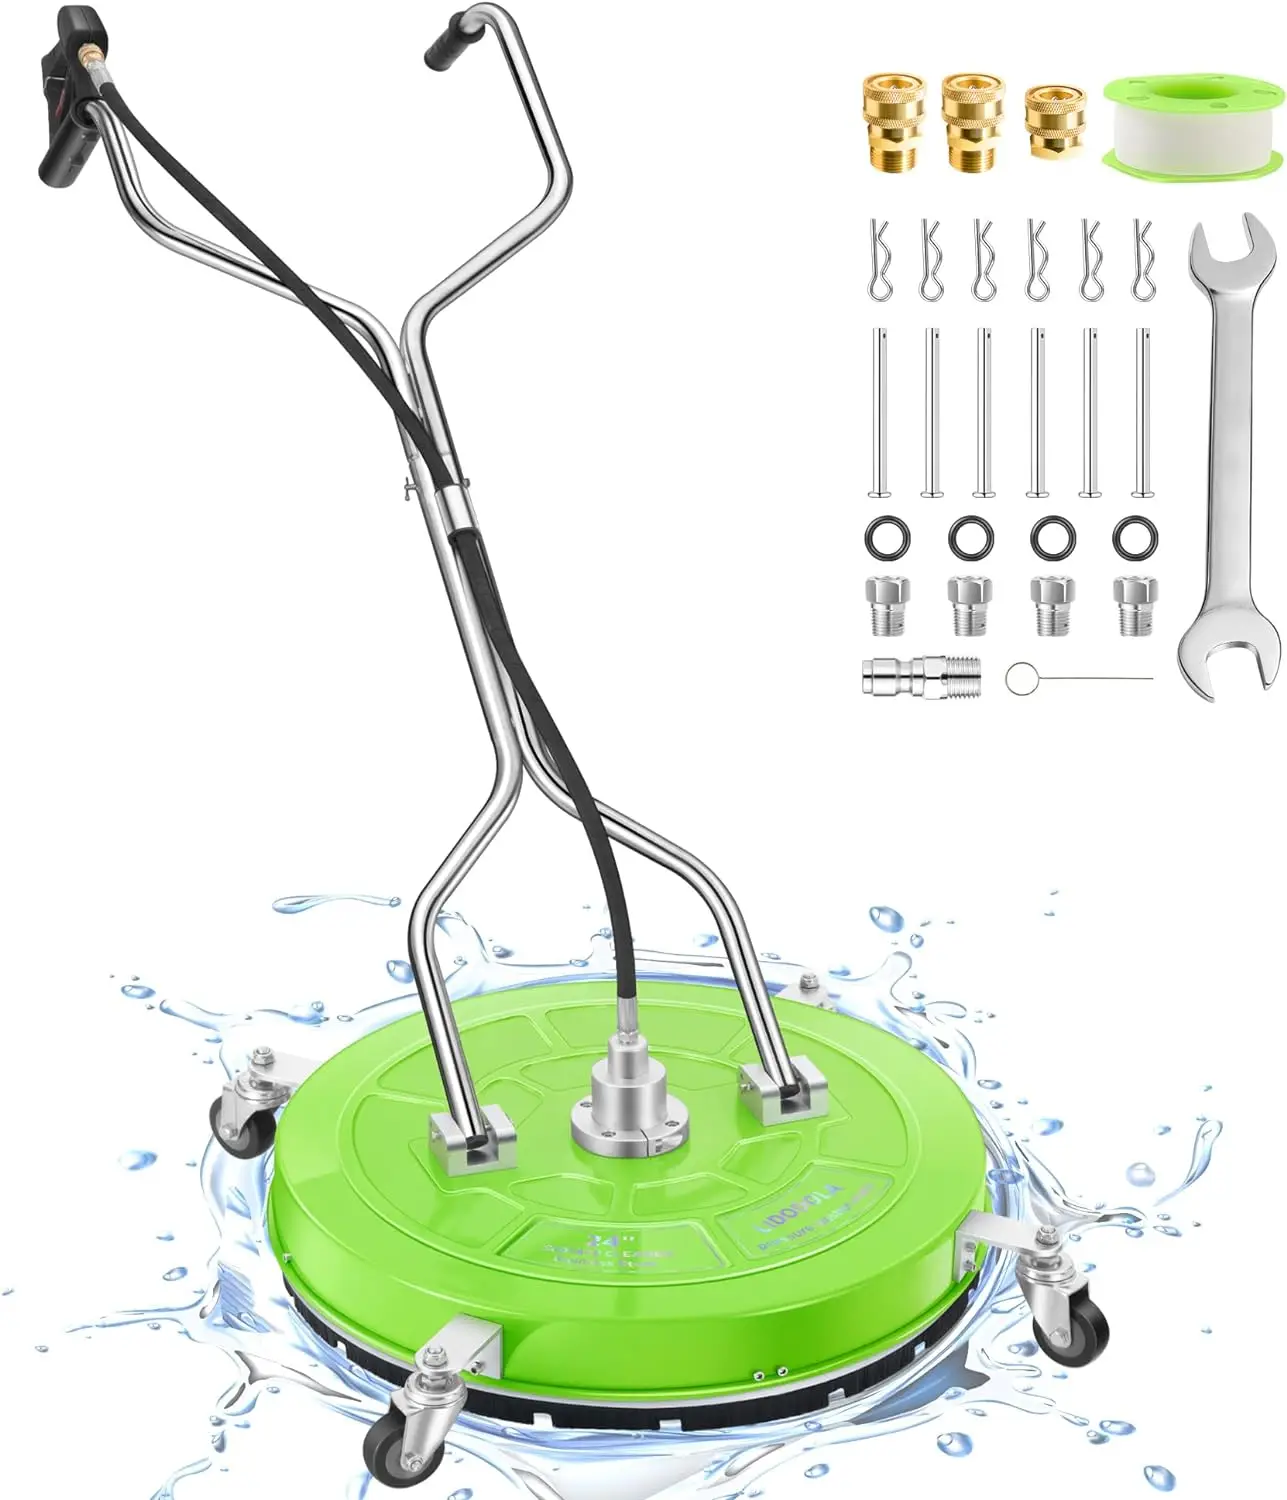 

24“ Pressure Washer Surface Cleaner with 4 Wheels - Coated Green Dual Handle Stainless Steel Surface Cleaner for Pressure Washer